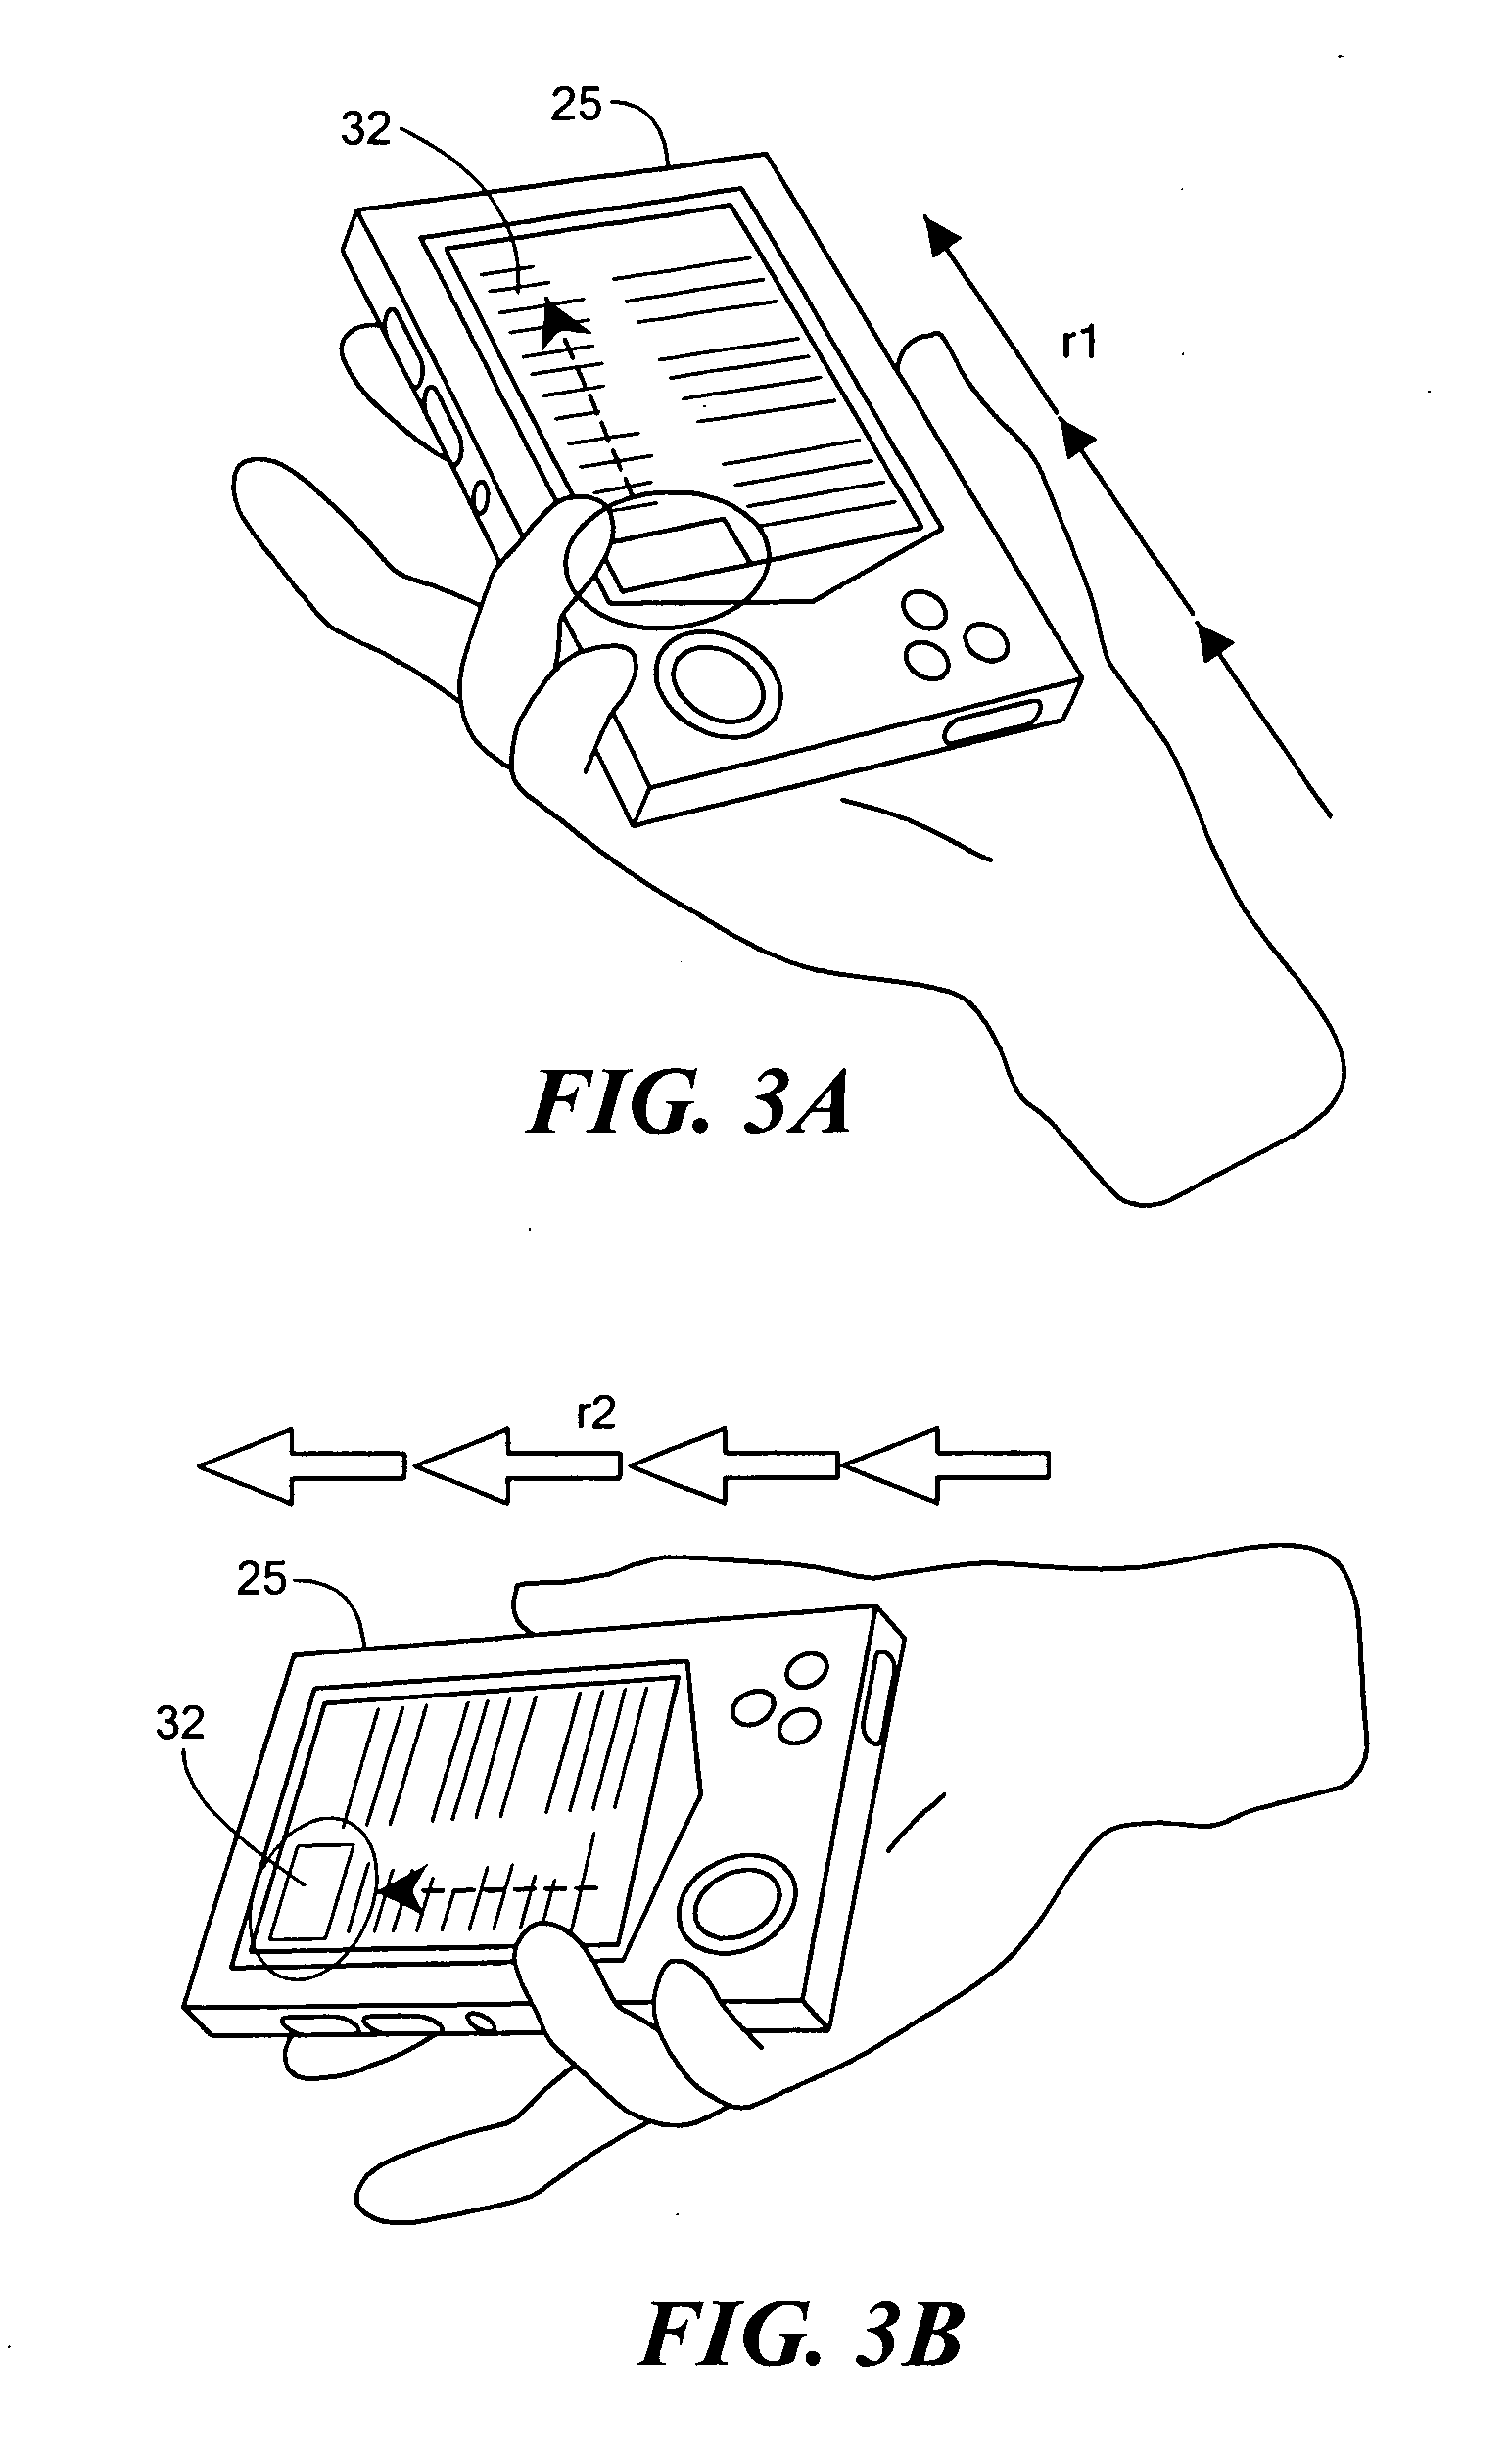 Air-writing and motion sensing input for portable devices